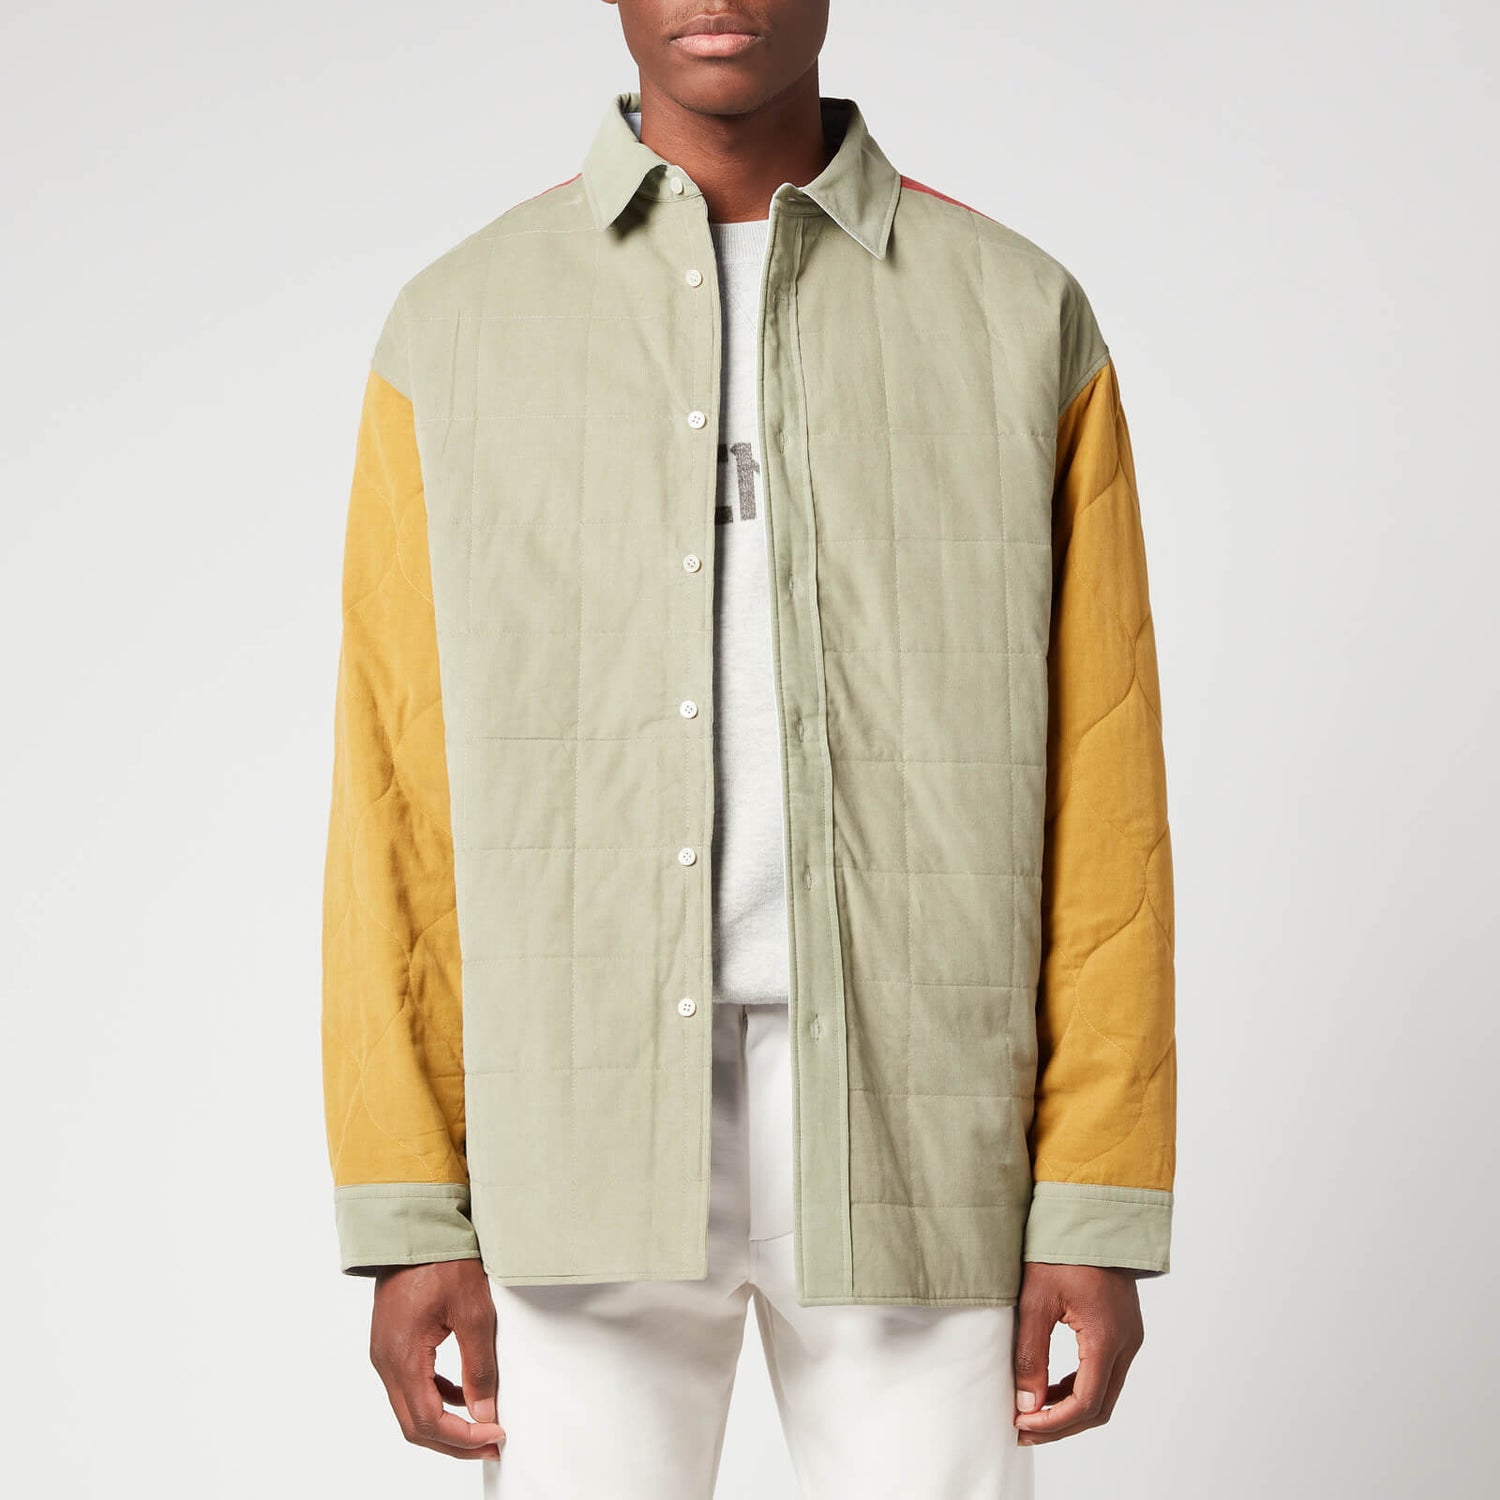 KENZO Men's Reversible Quilted Shirt - Lime Tea